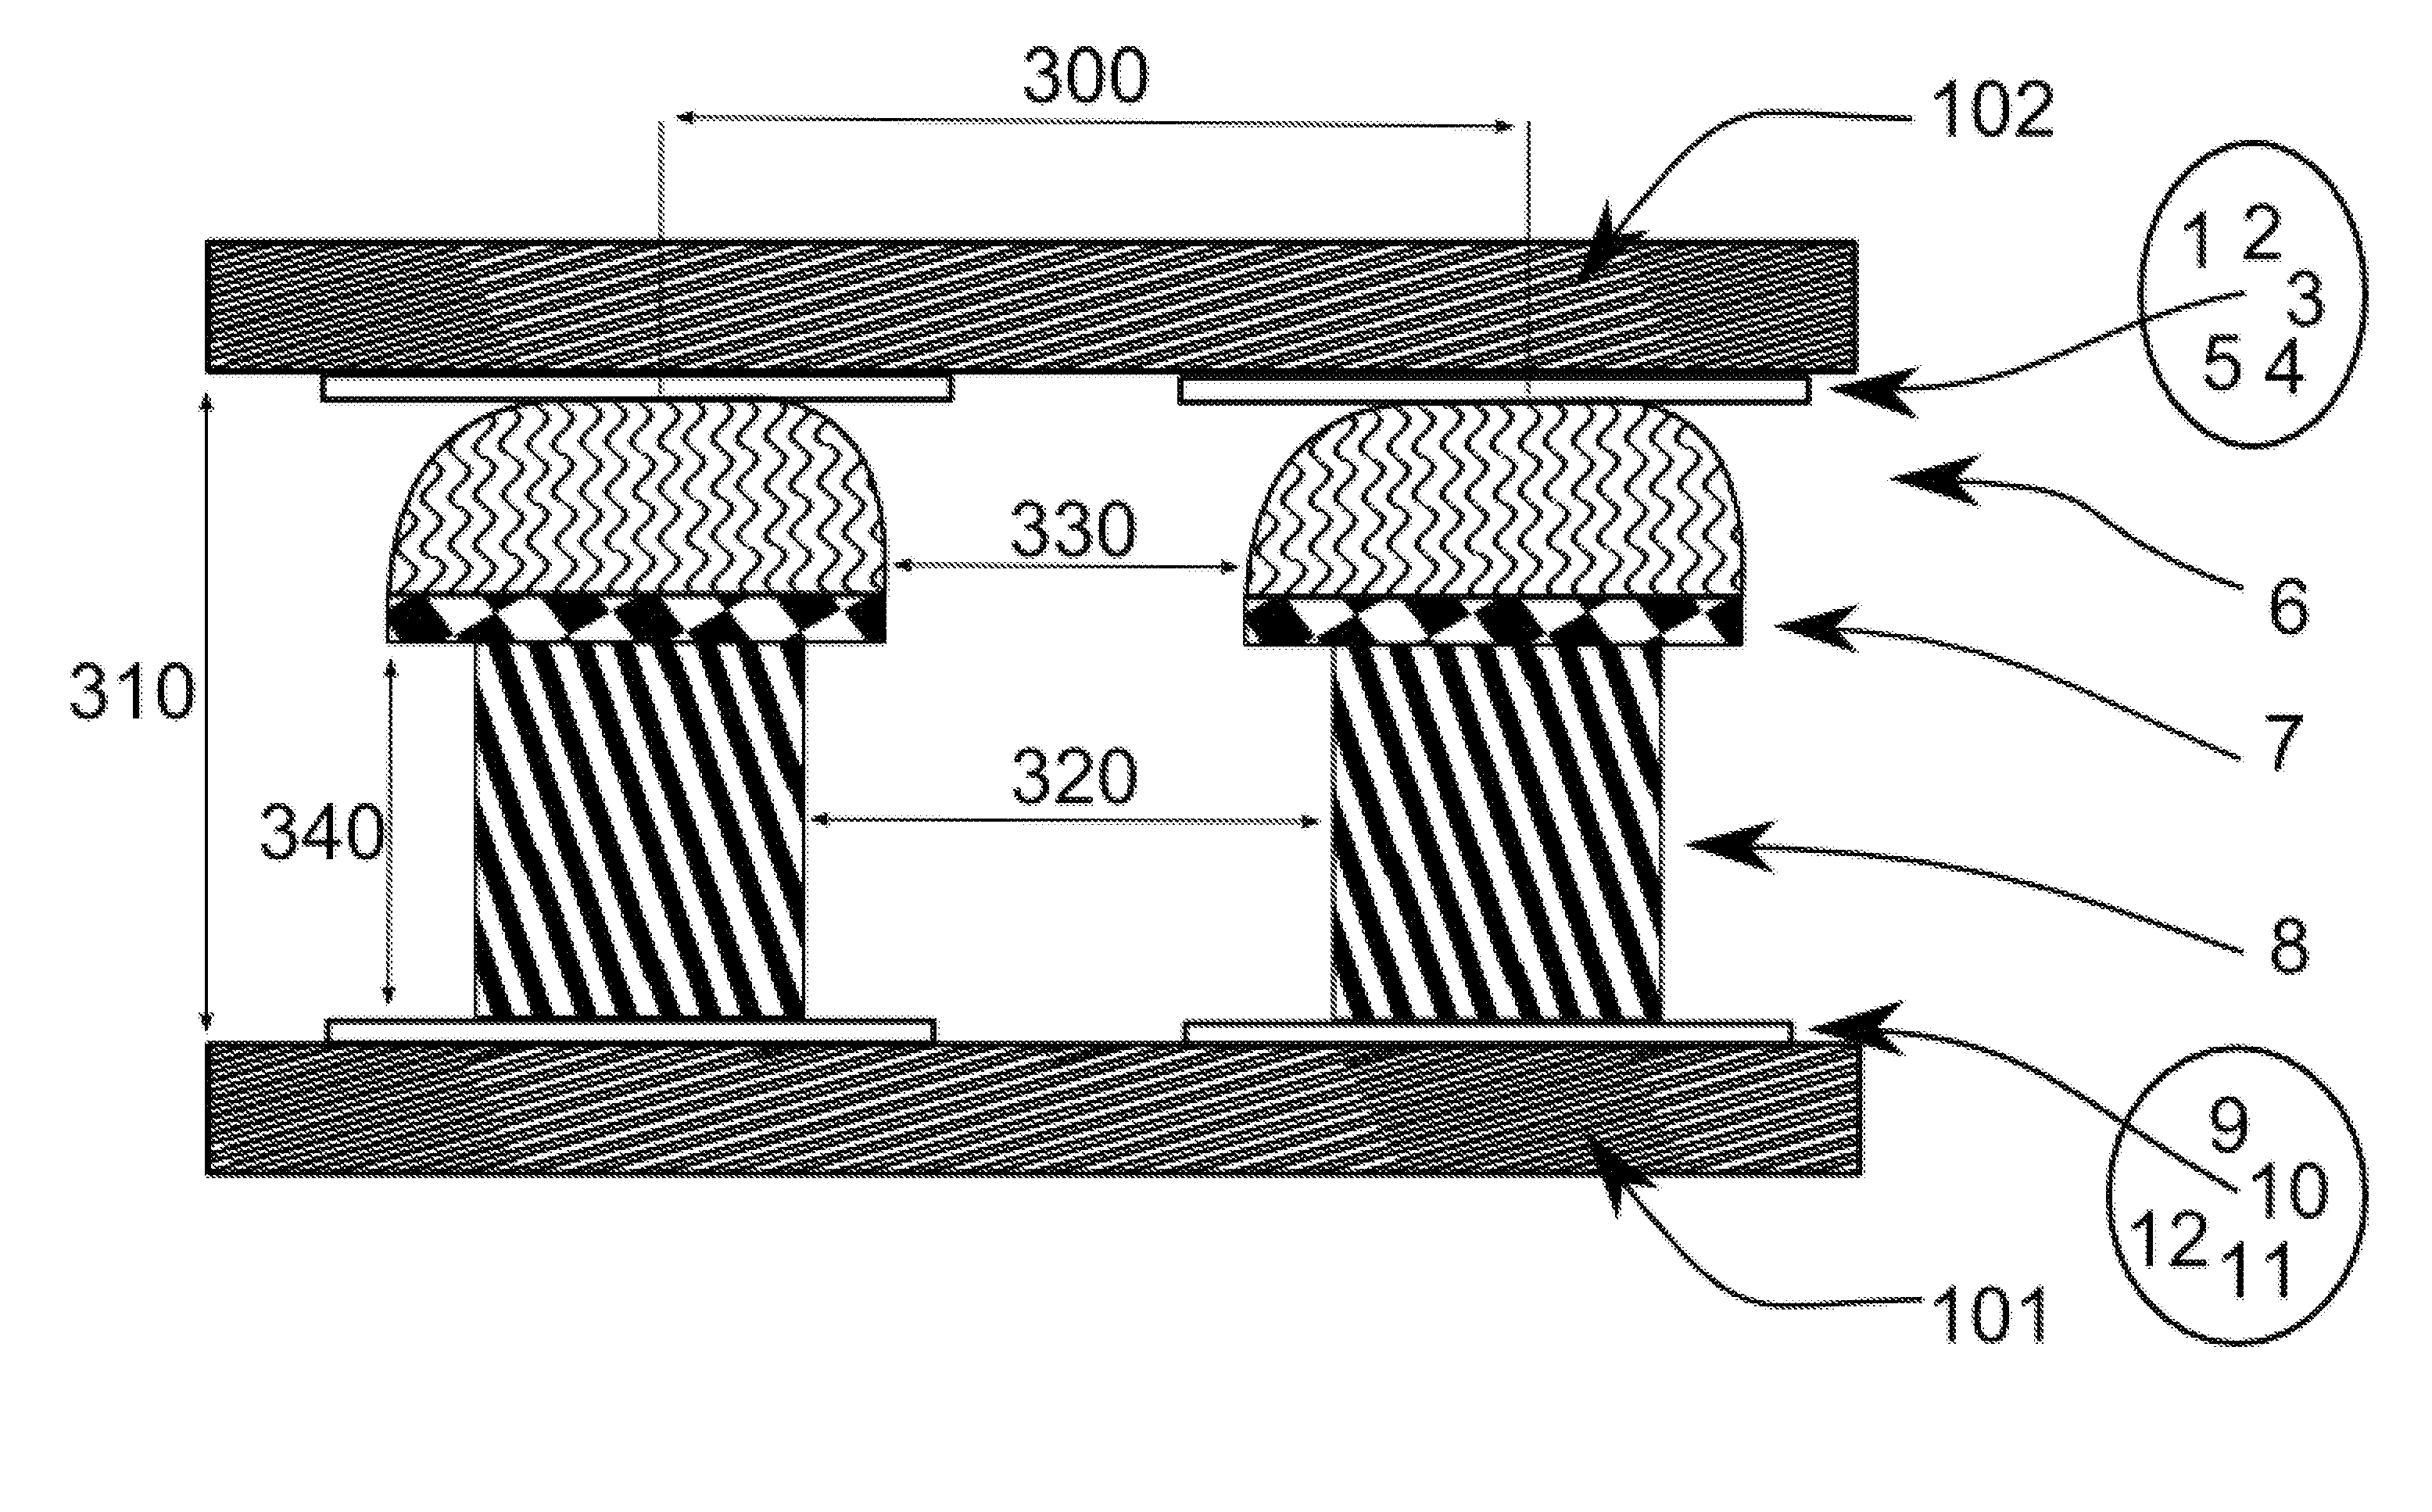 Semiconductor bump-bonded x-ray imaging device